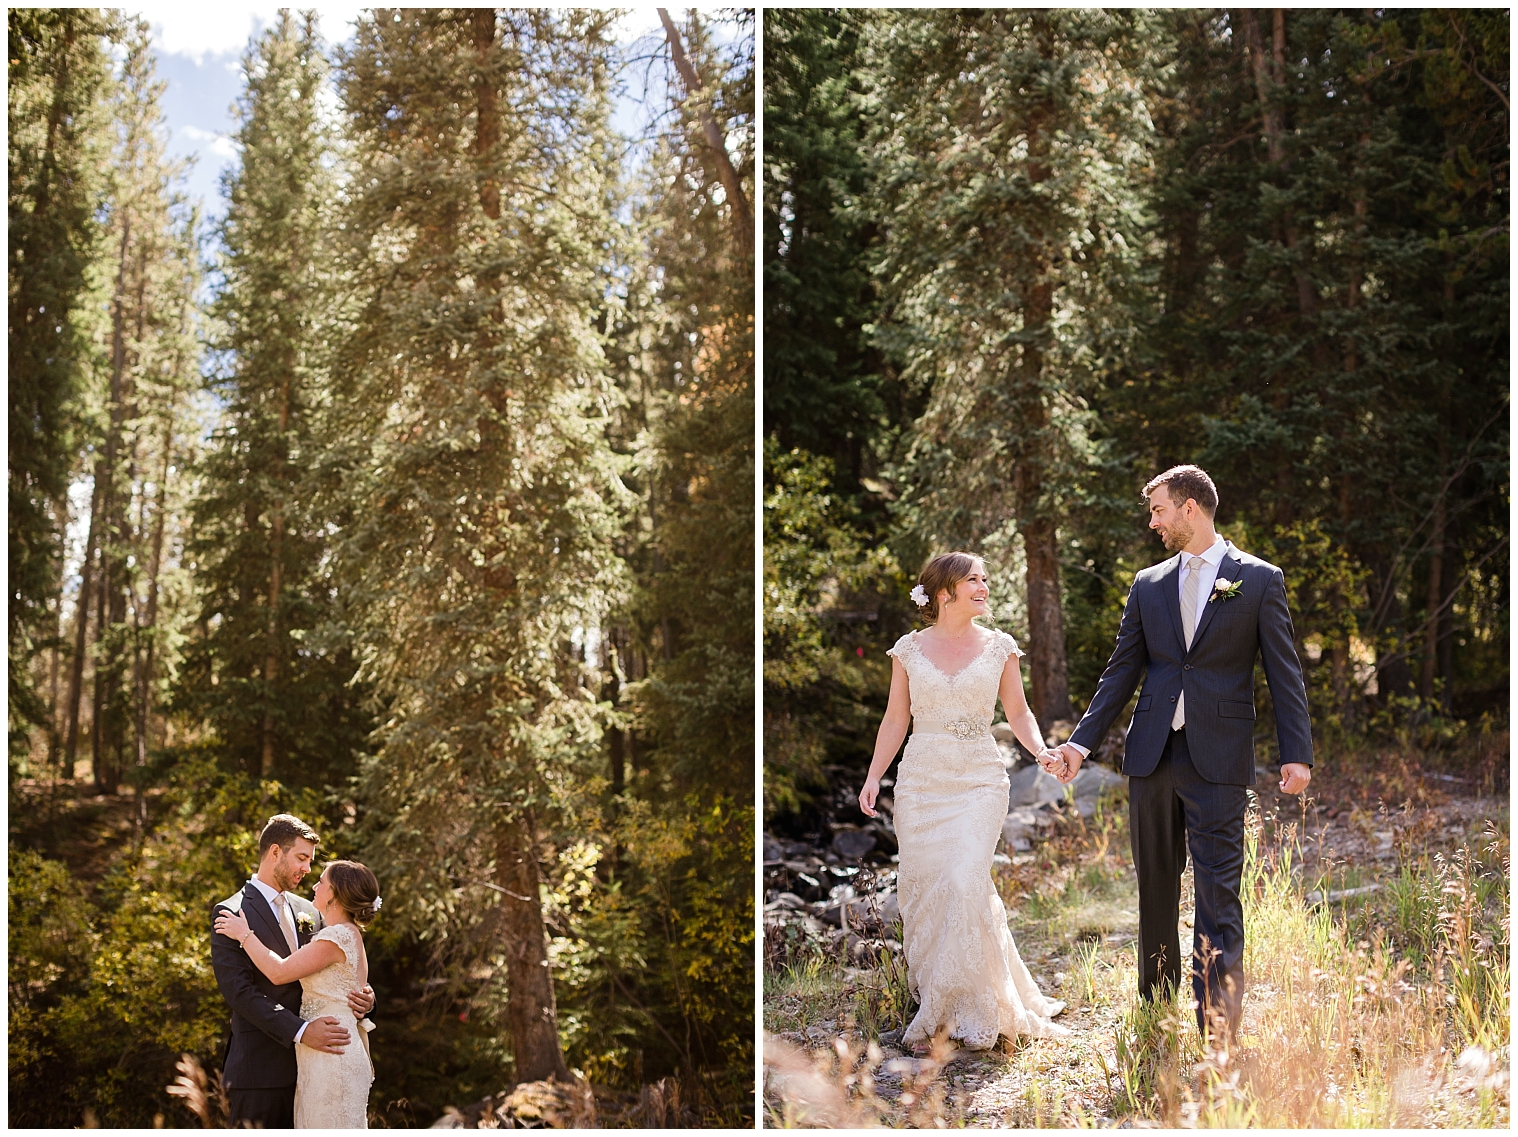 Bride and groom walk hand in hand during portraits at their Copper Mountain wedding.